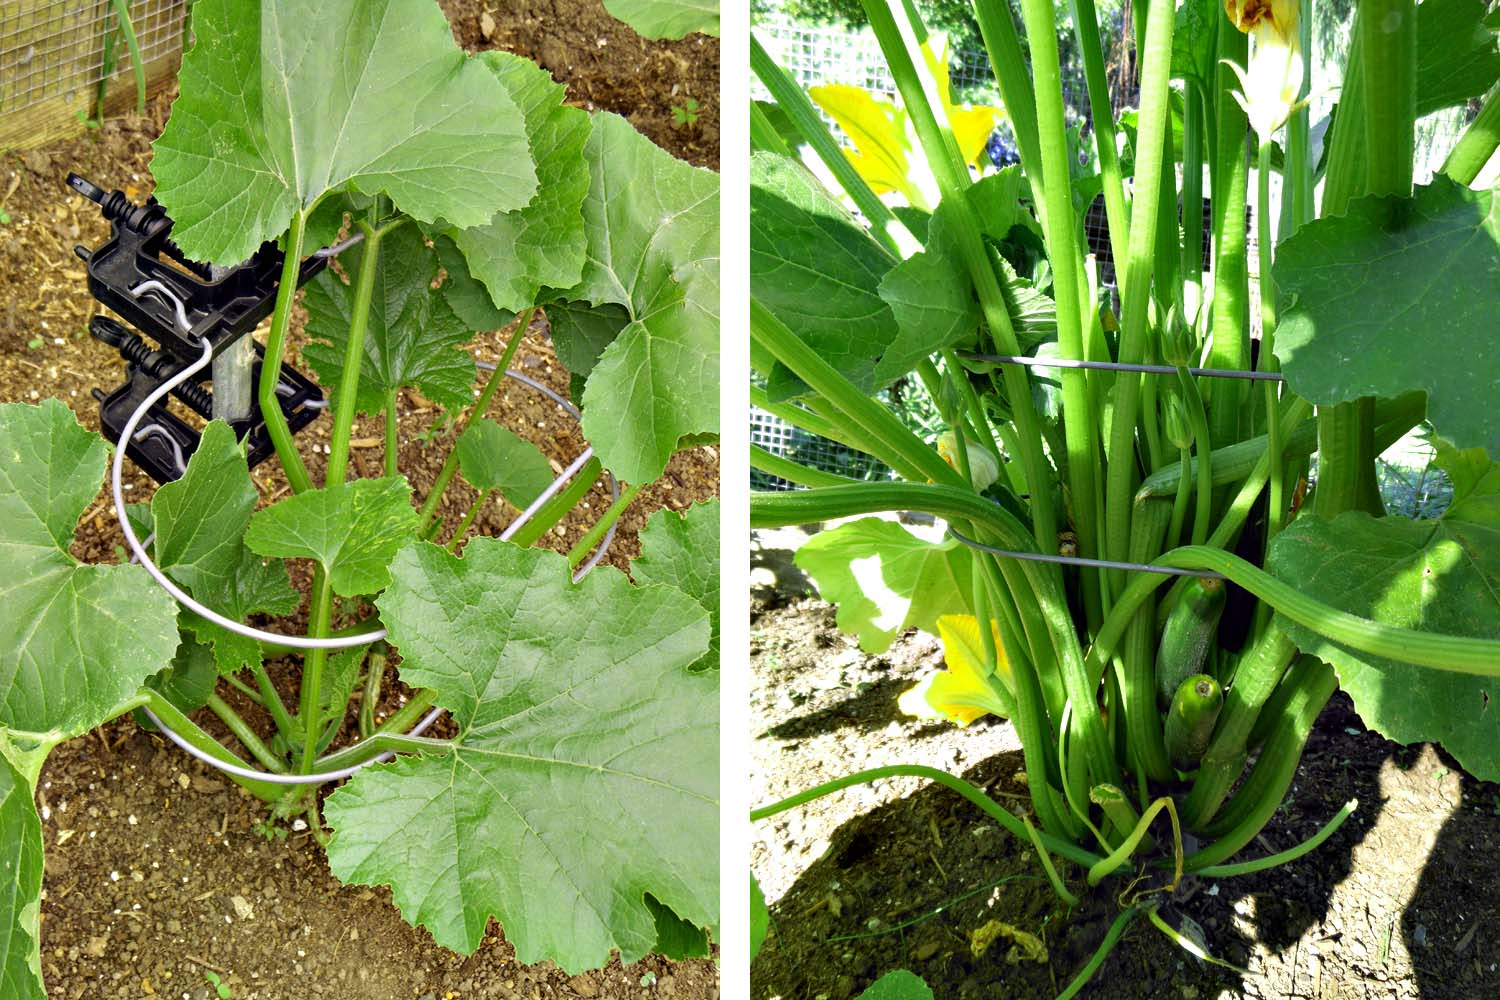 An image of a zucchini plant growing in a garden, with large green leaves and yellow flowers.